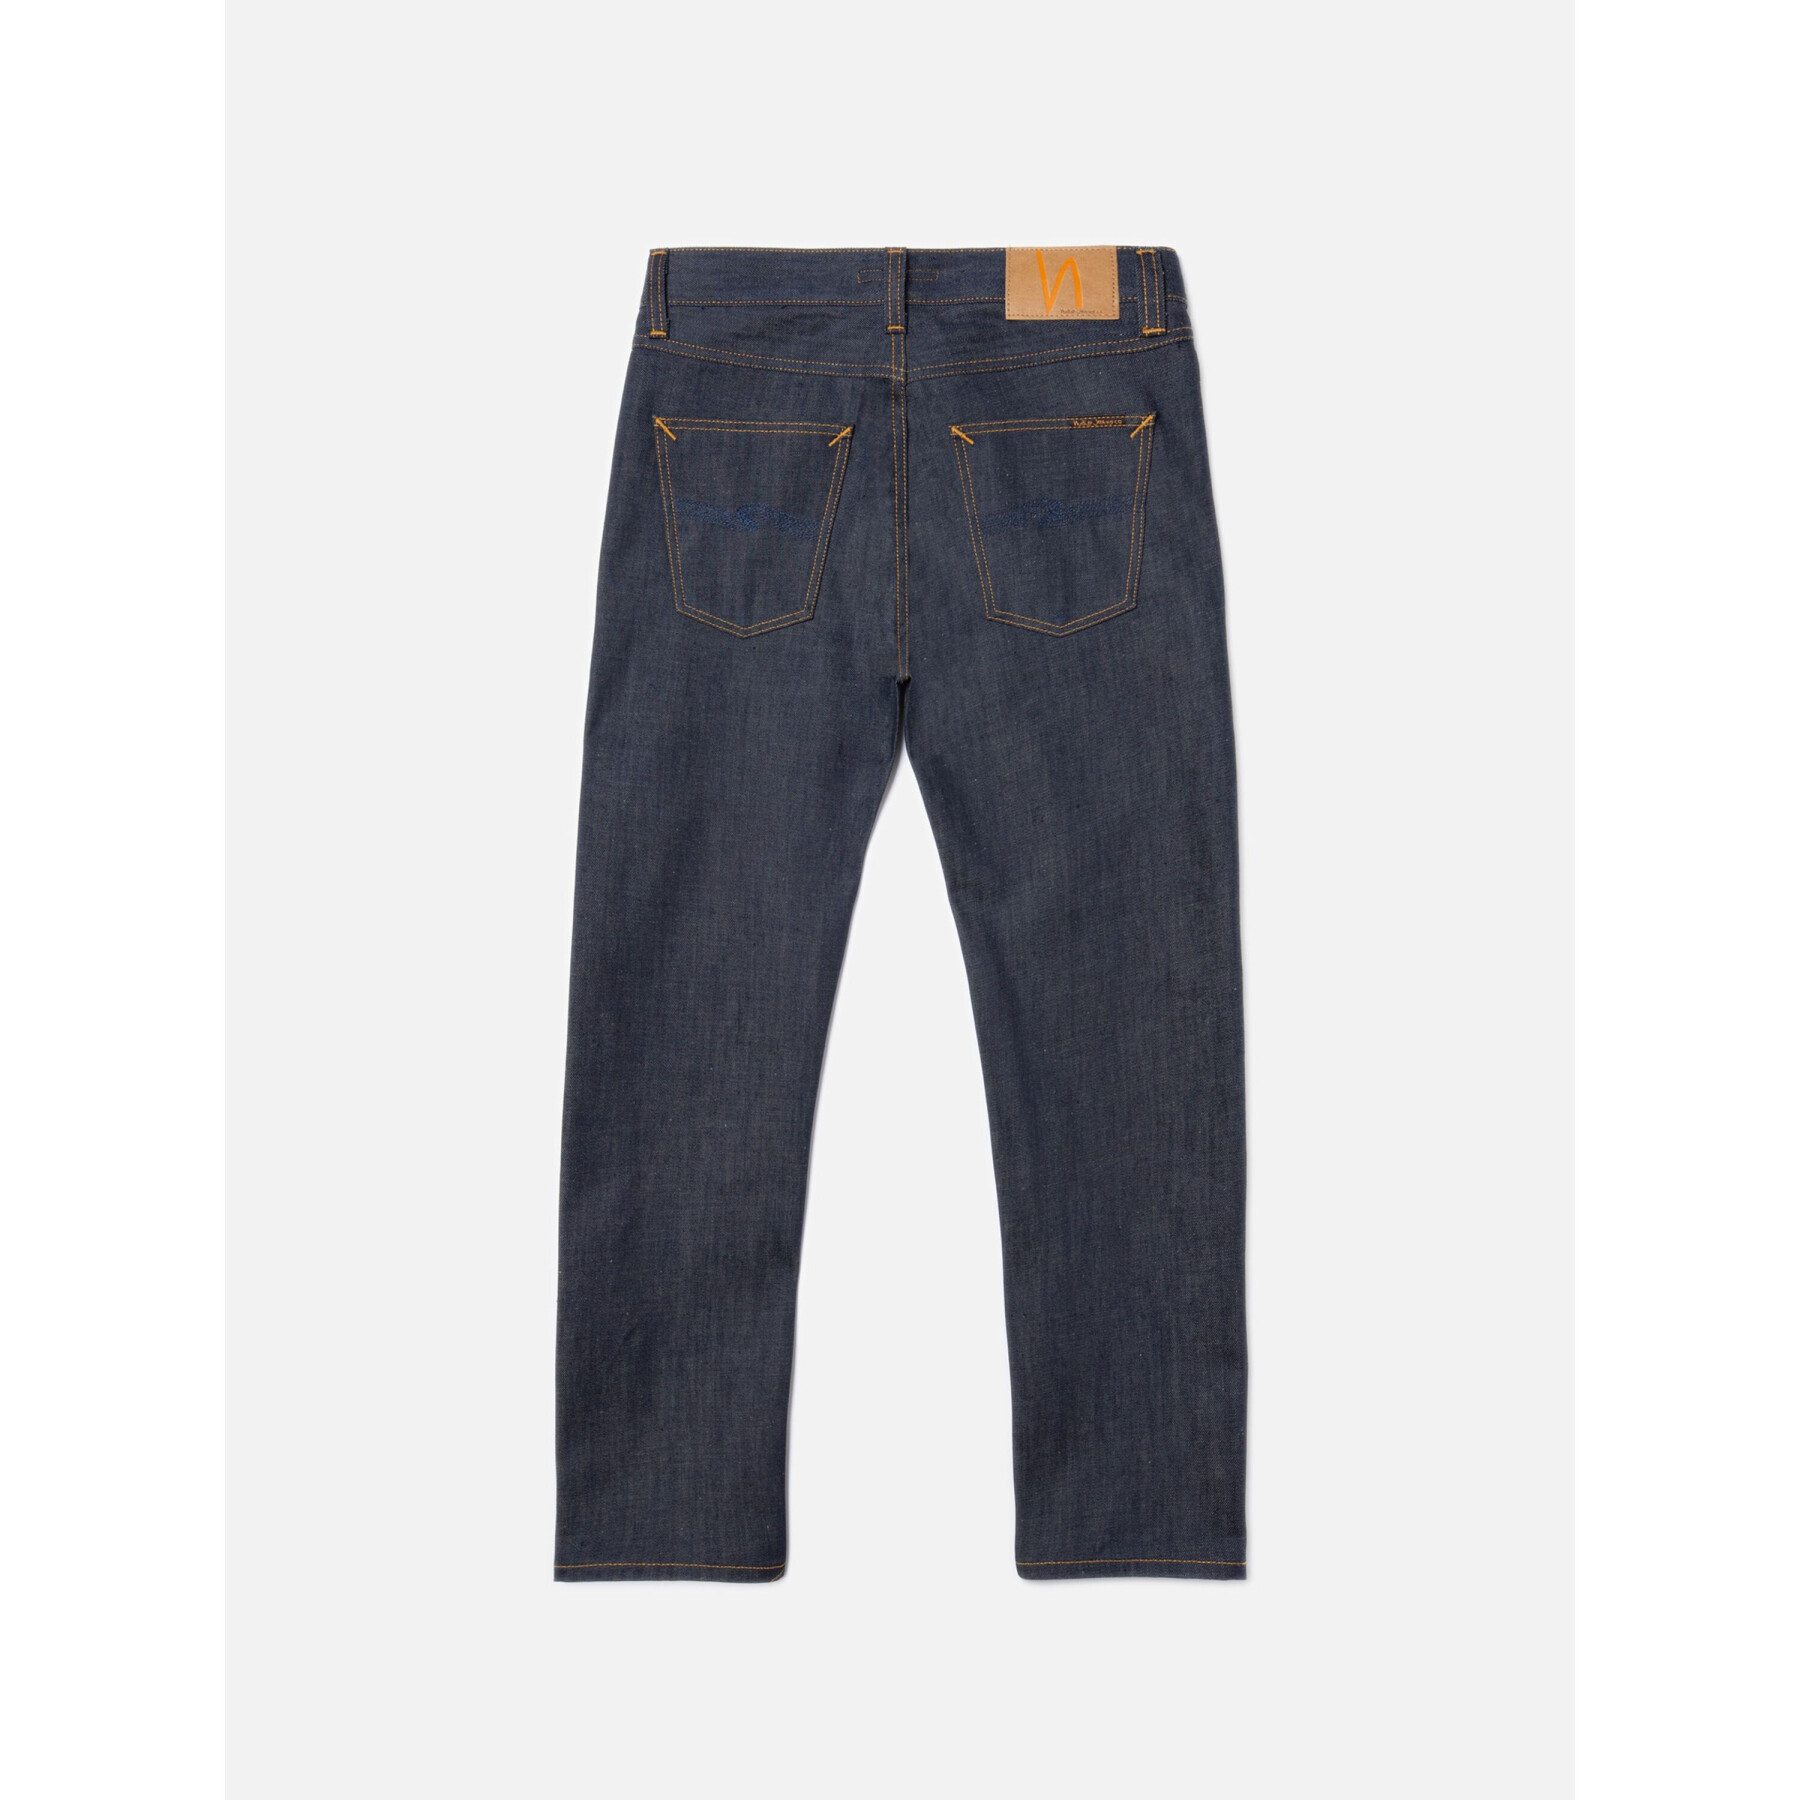 Jeans Nudie Jeans Gritty Jackson Dry Old